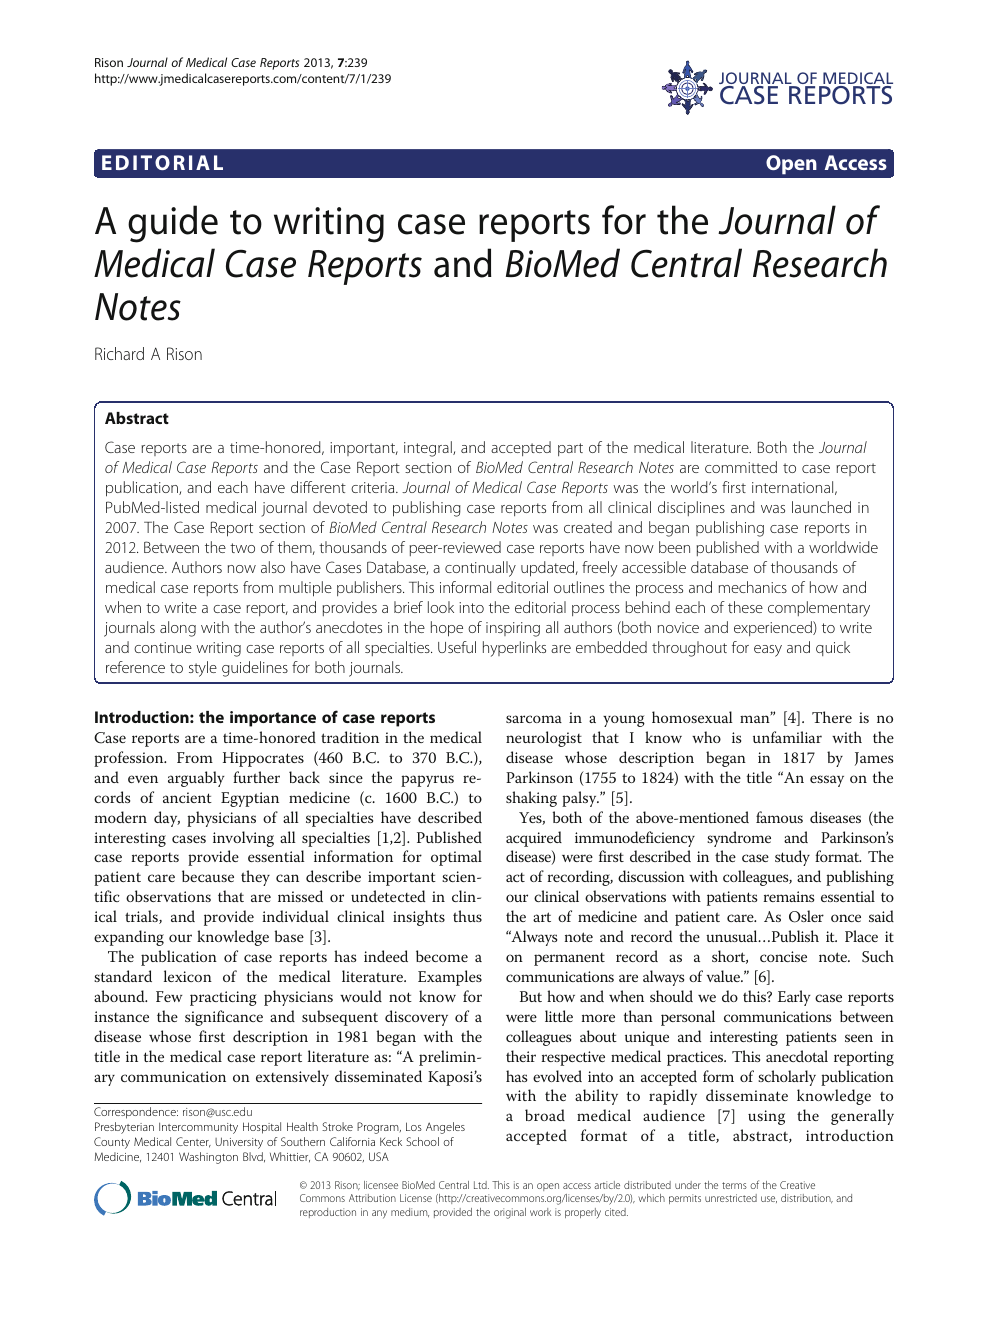 A guide to writing case reports for the Journal of Medical Case